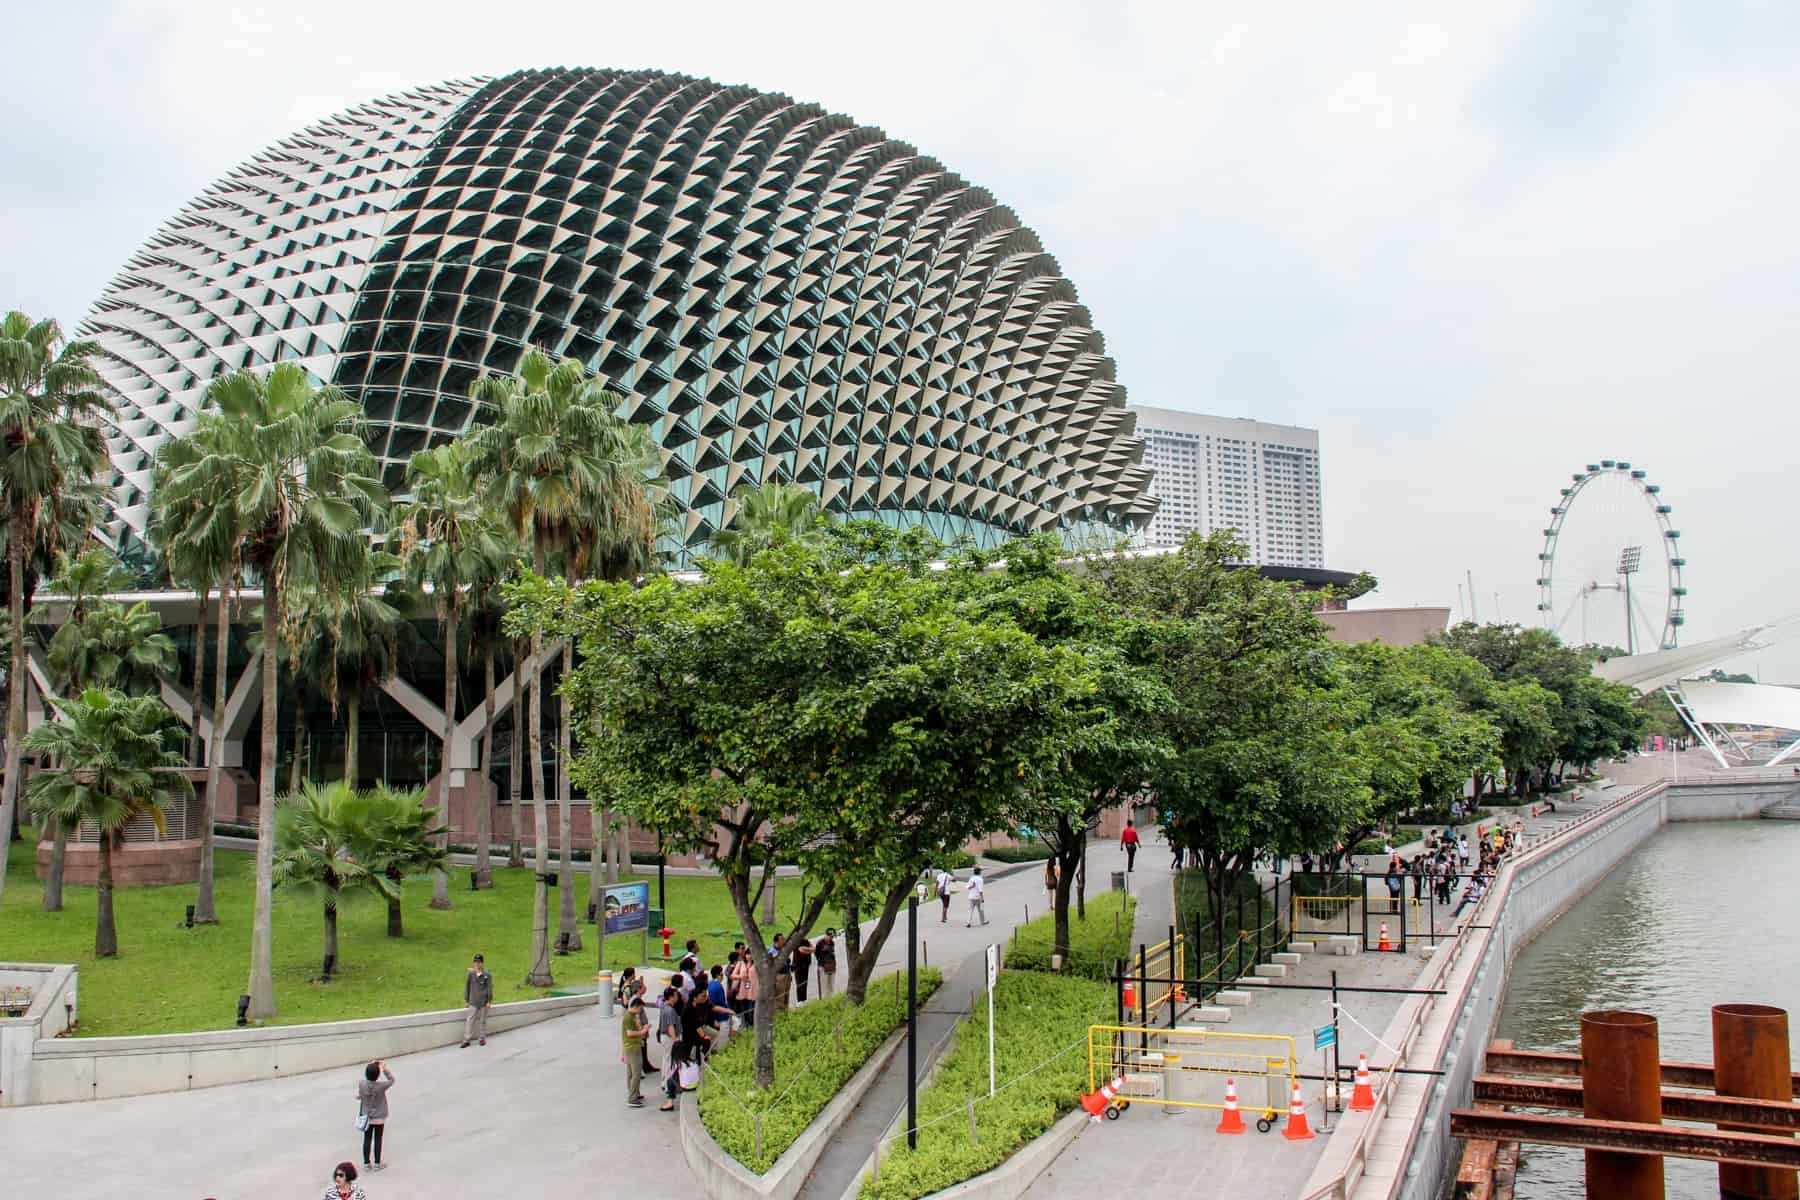 The silver hedgehog building in Singapore is the Singapore Opera building that sit on the River surrounding by green trees and a long promenade walkway